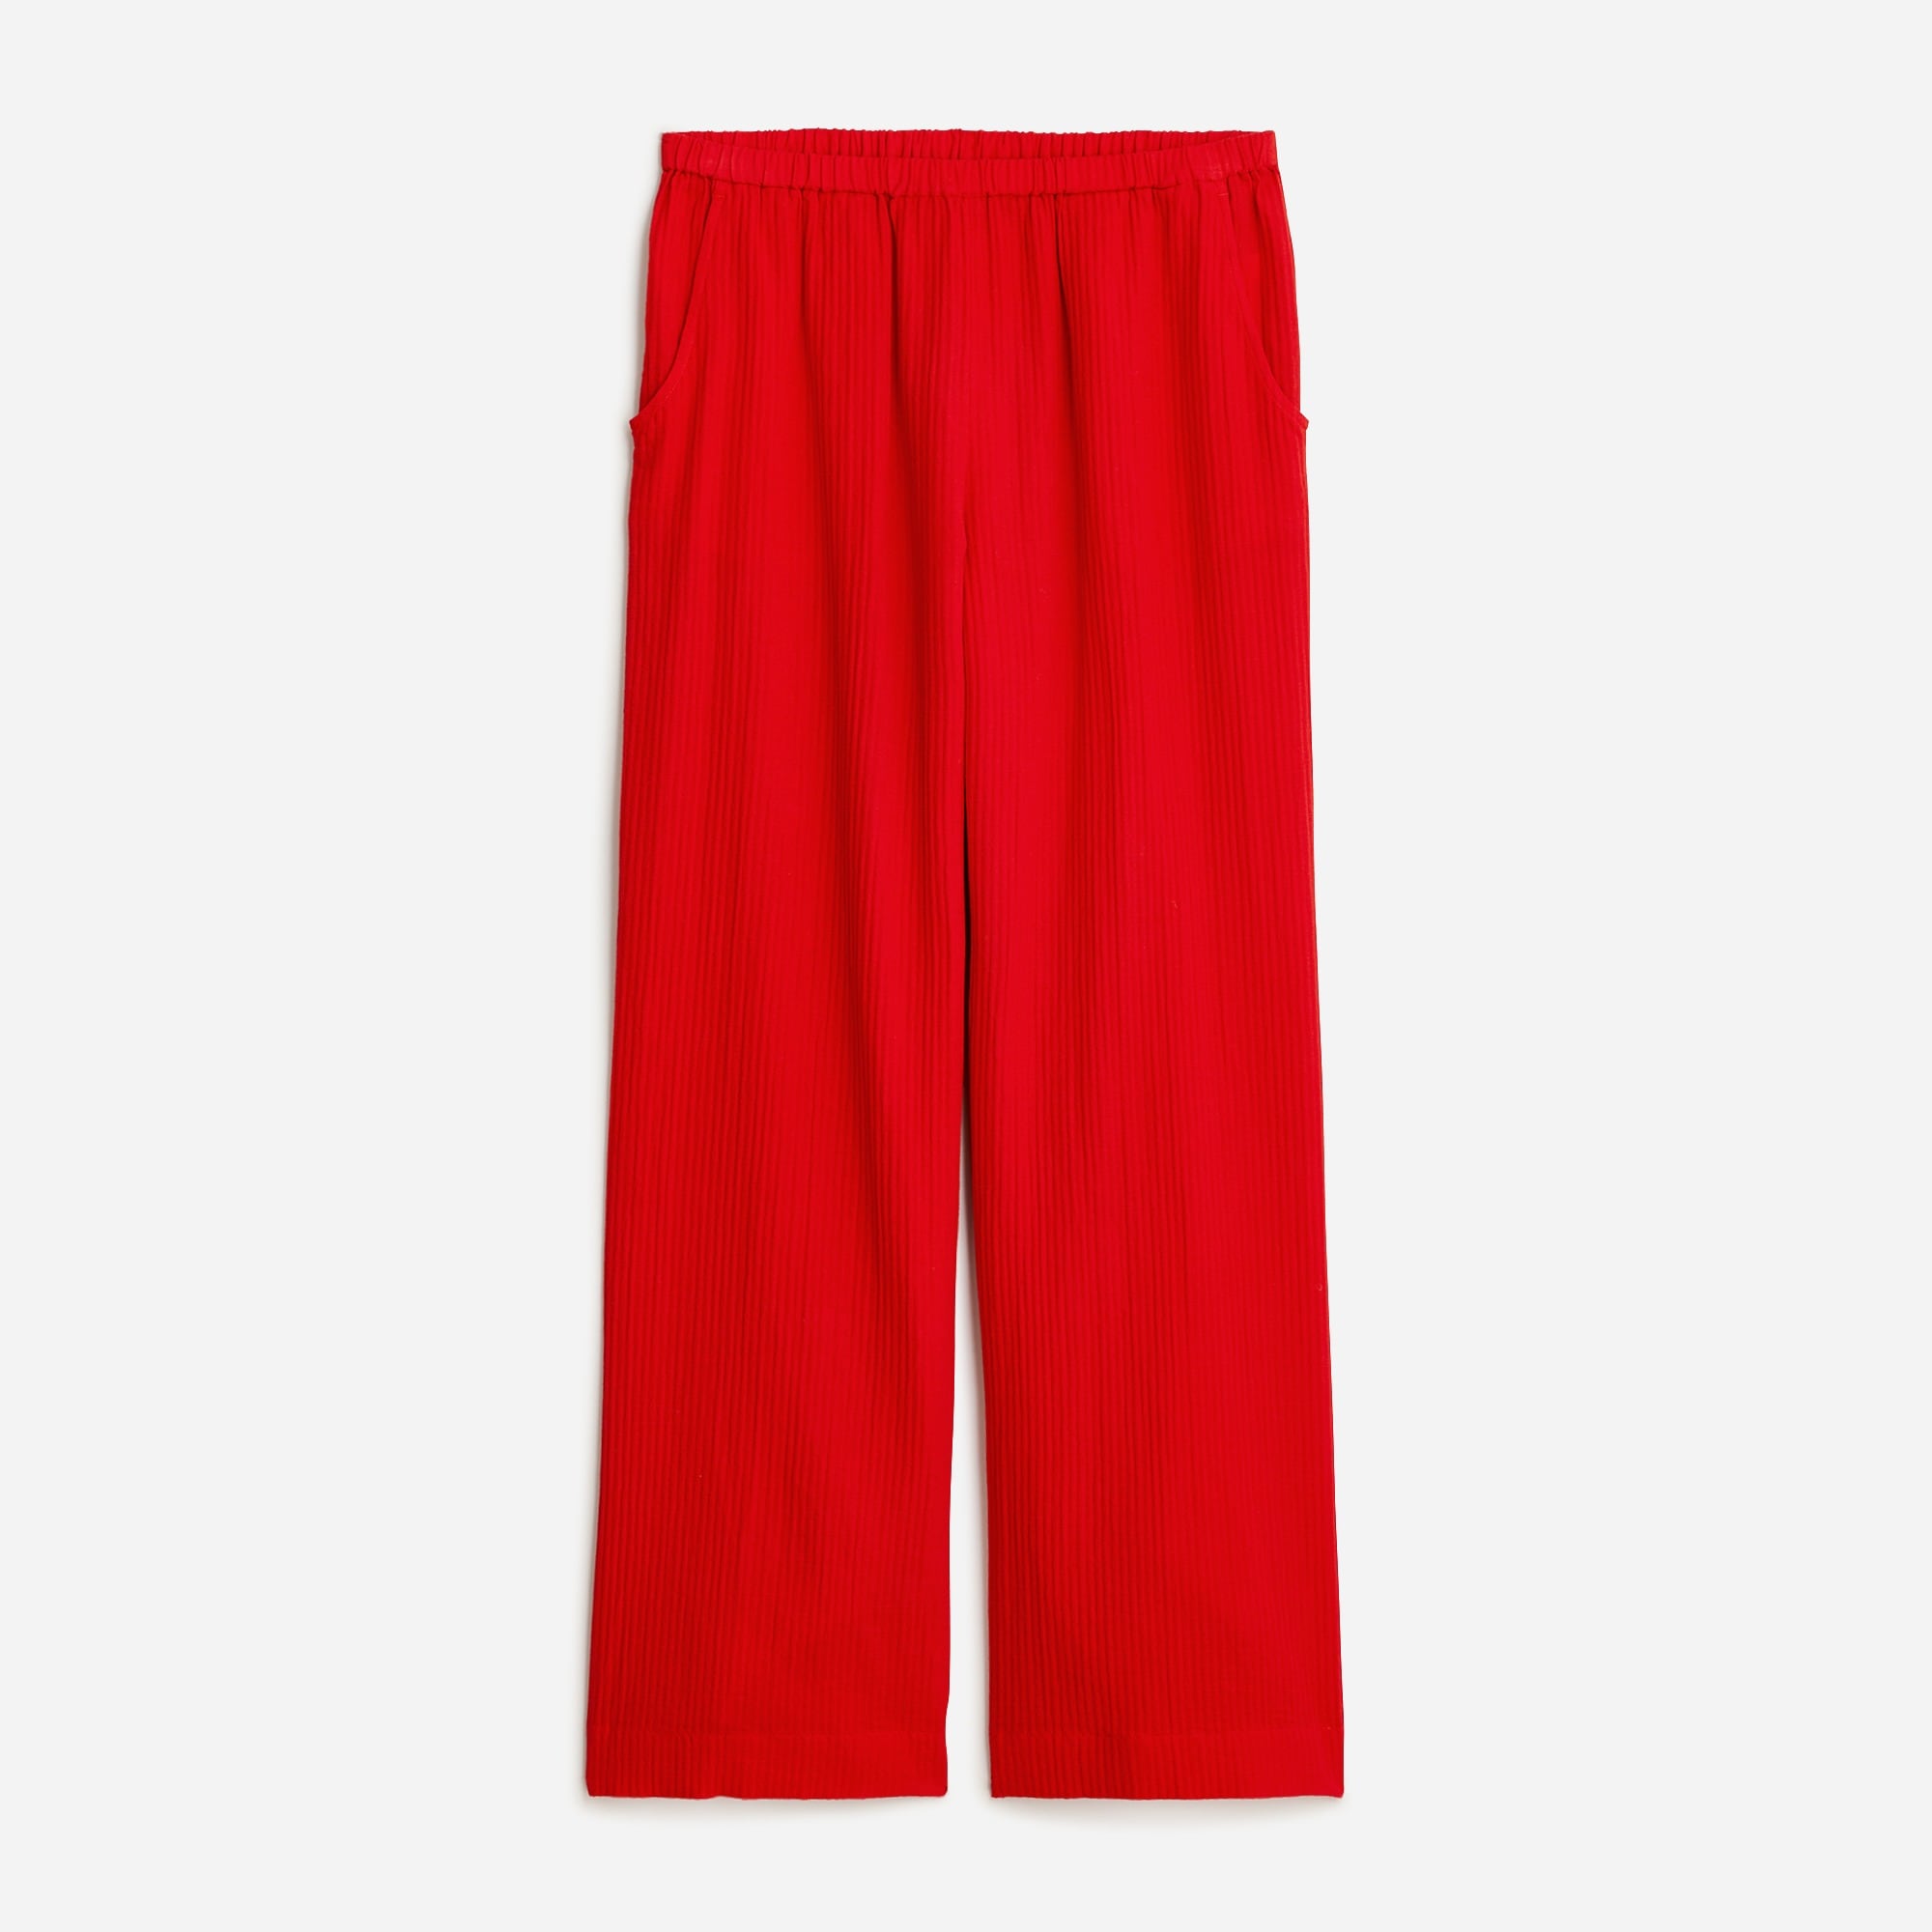 womens Relaxed beach pant in airy gauze